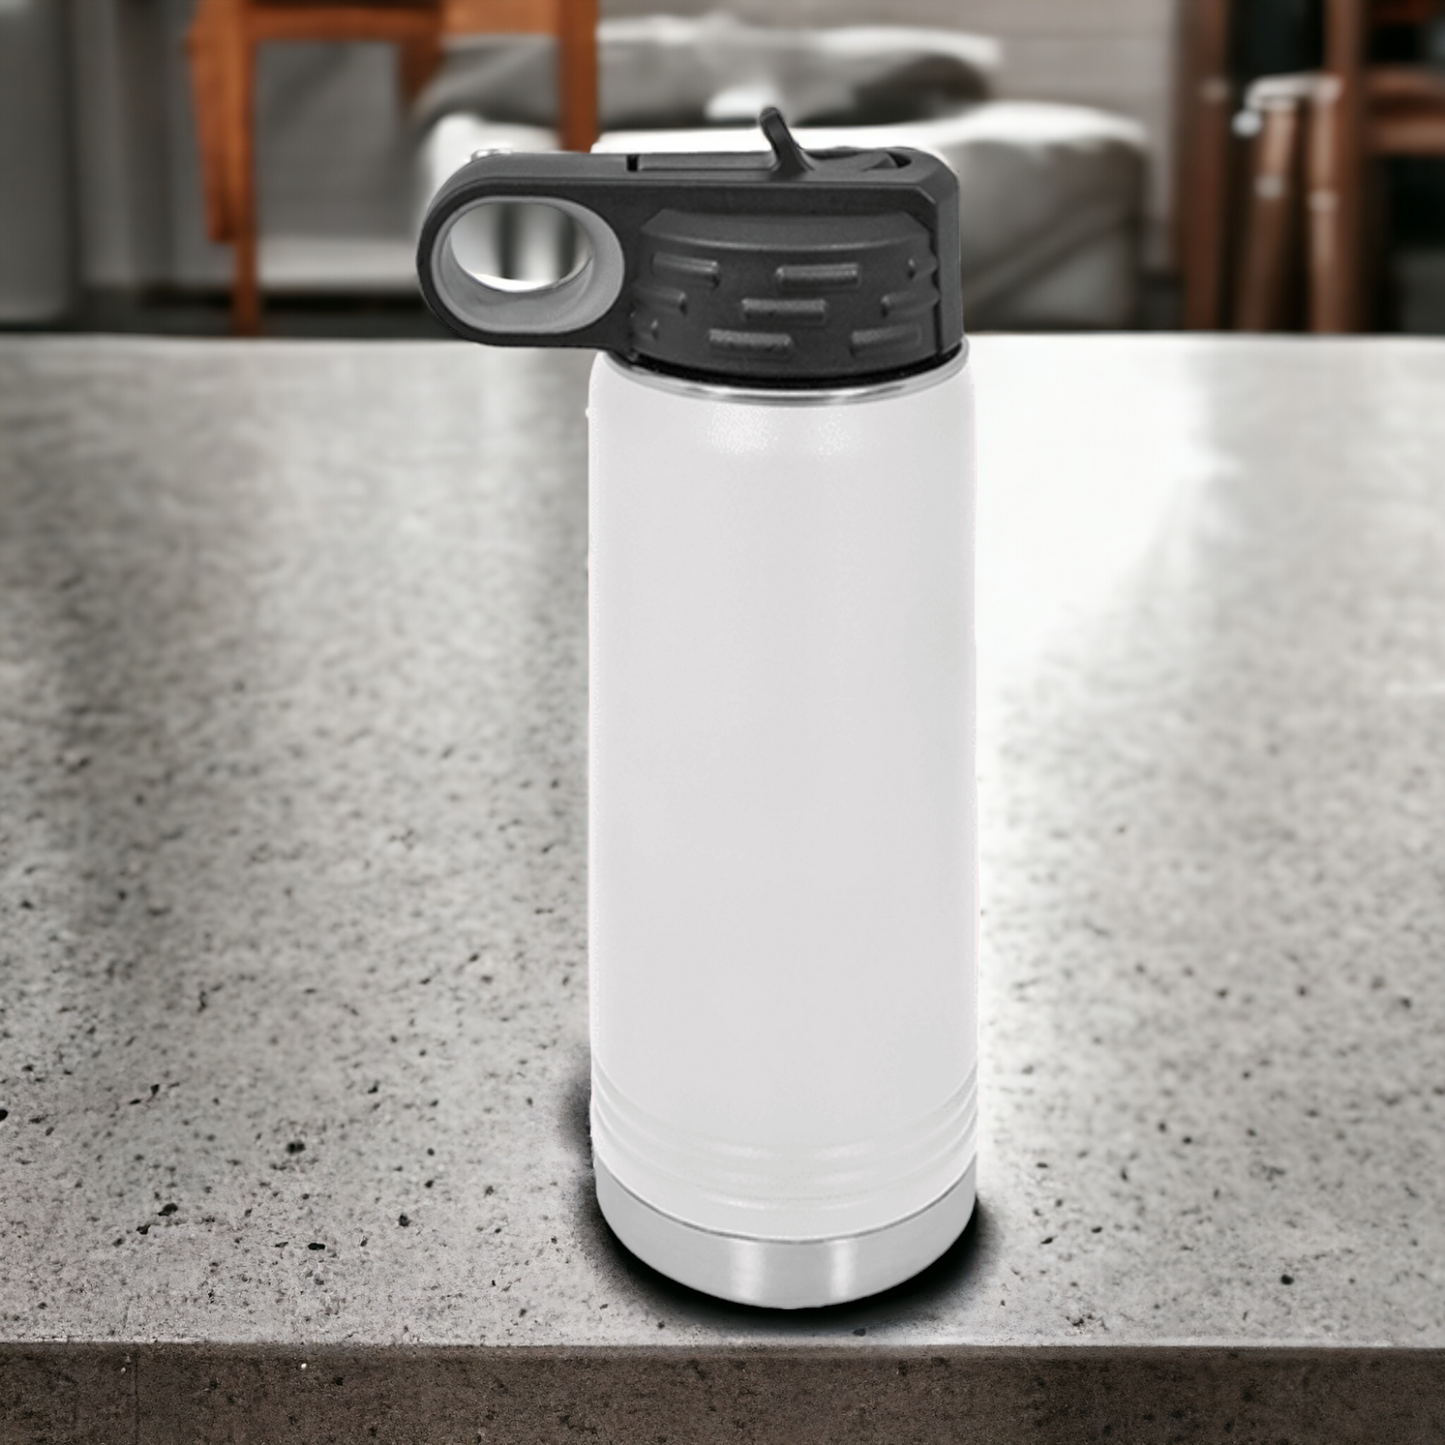 Customizable Polar Camel High Endurance Insulated Water Bottle - Available in 12 oz., 20 oz., and 32 oz.  Product D